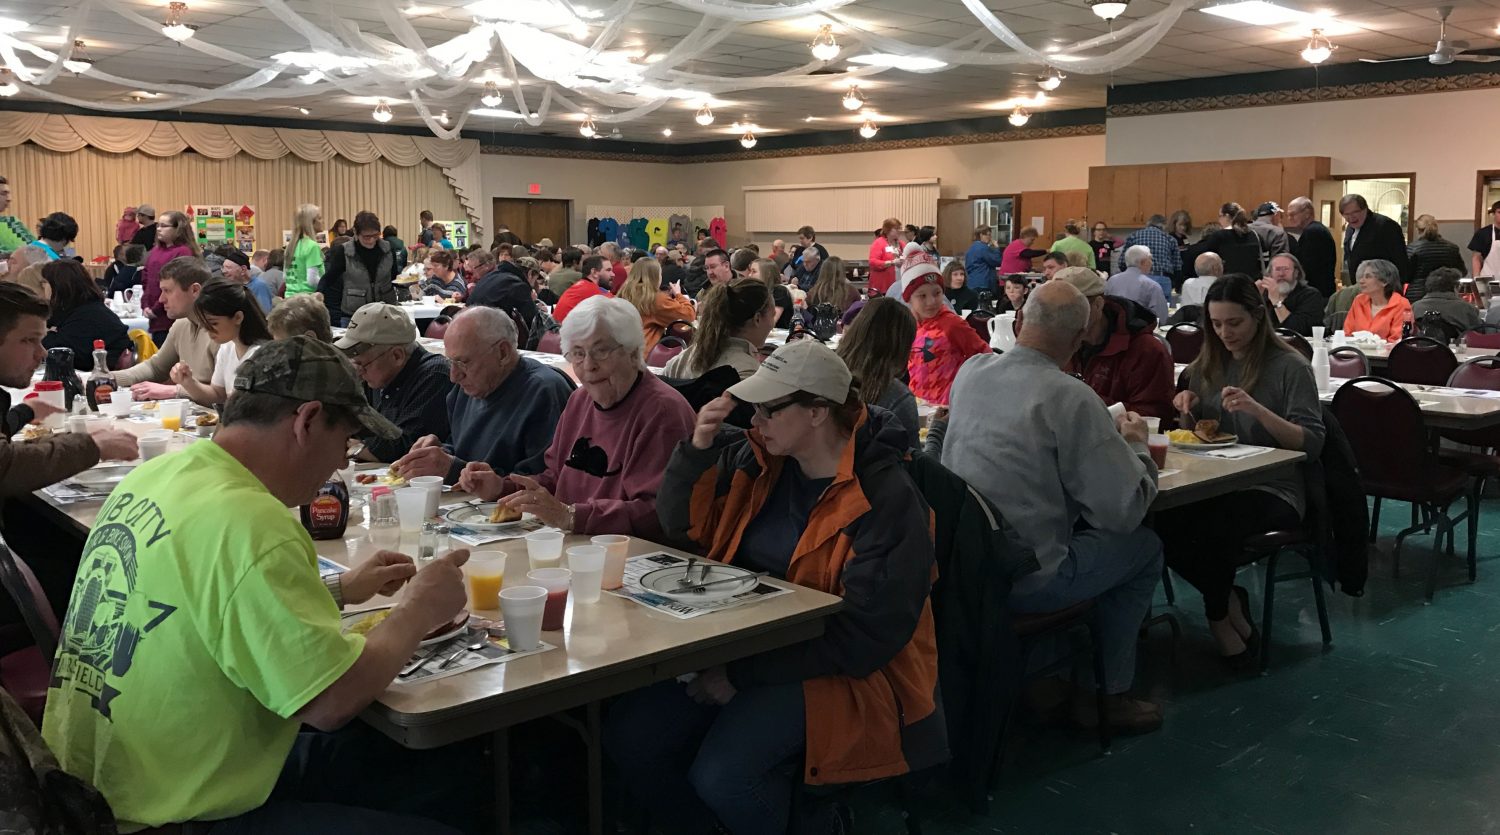 Over 1,000 people attended MAPS' Paws & Pancakes breakfast fundraiser on Feb. 6.